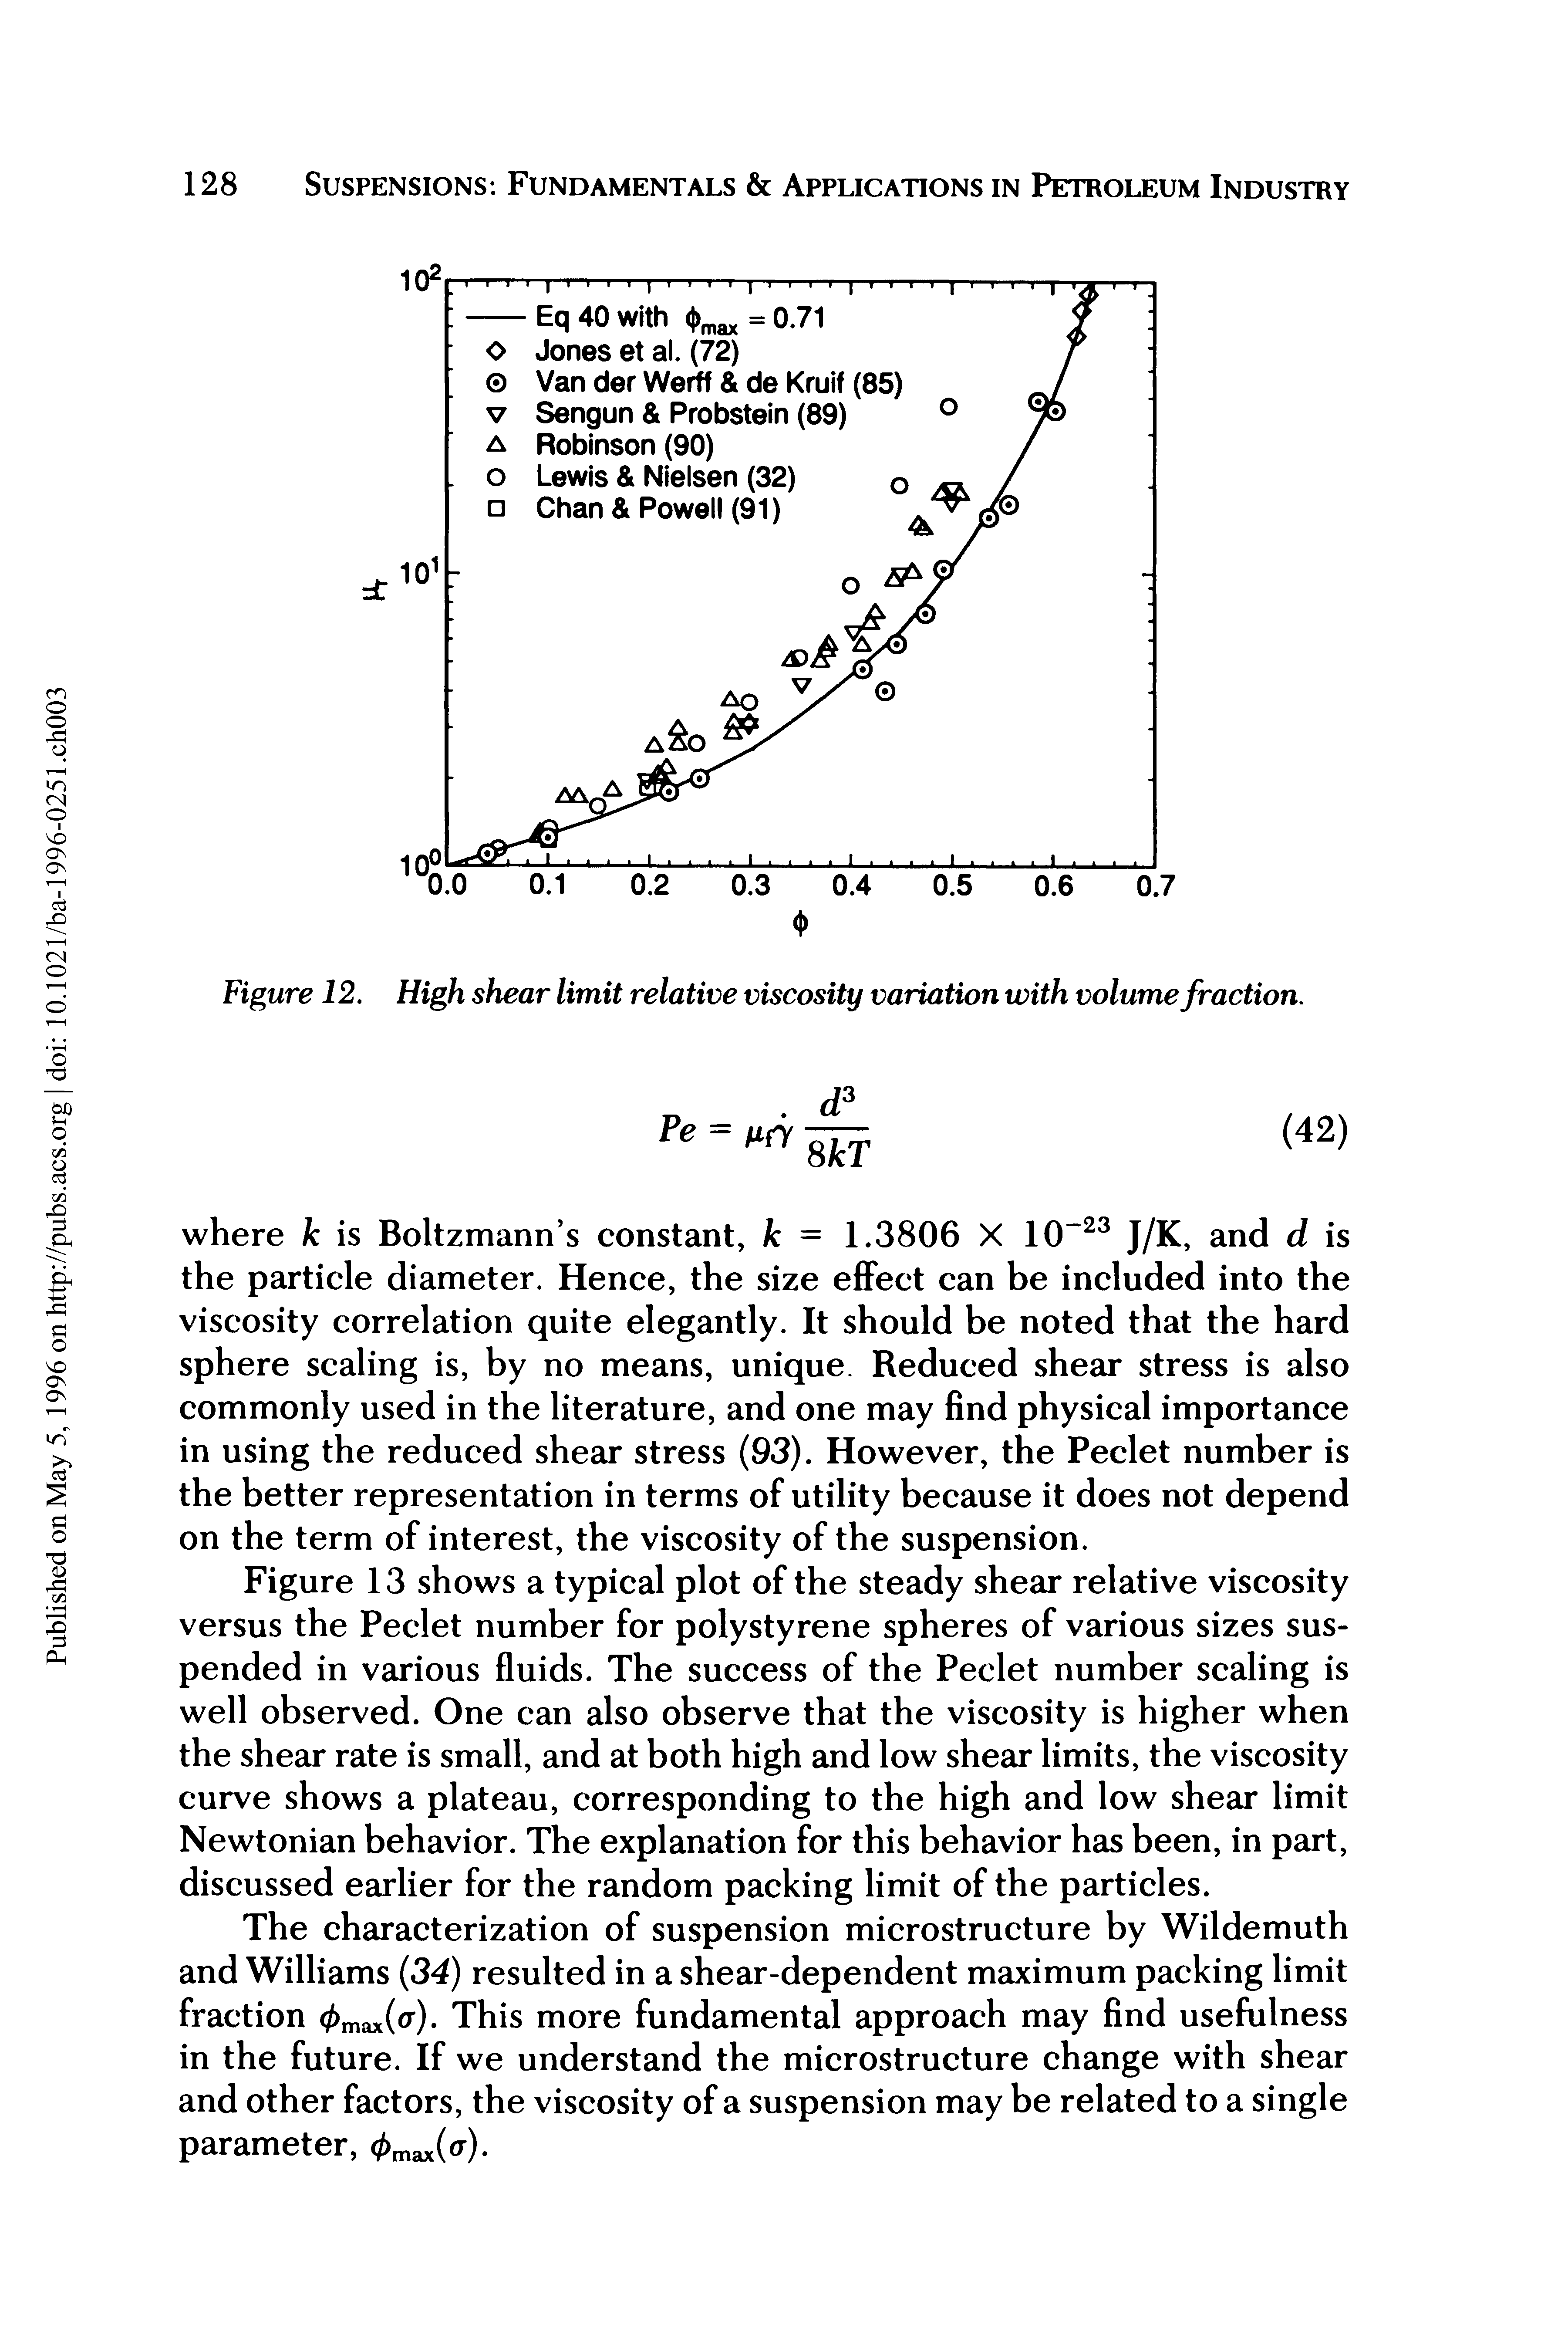 Figure 12. High shear limit relative viscosity variation with volume fraction.